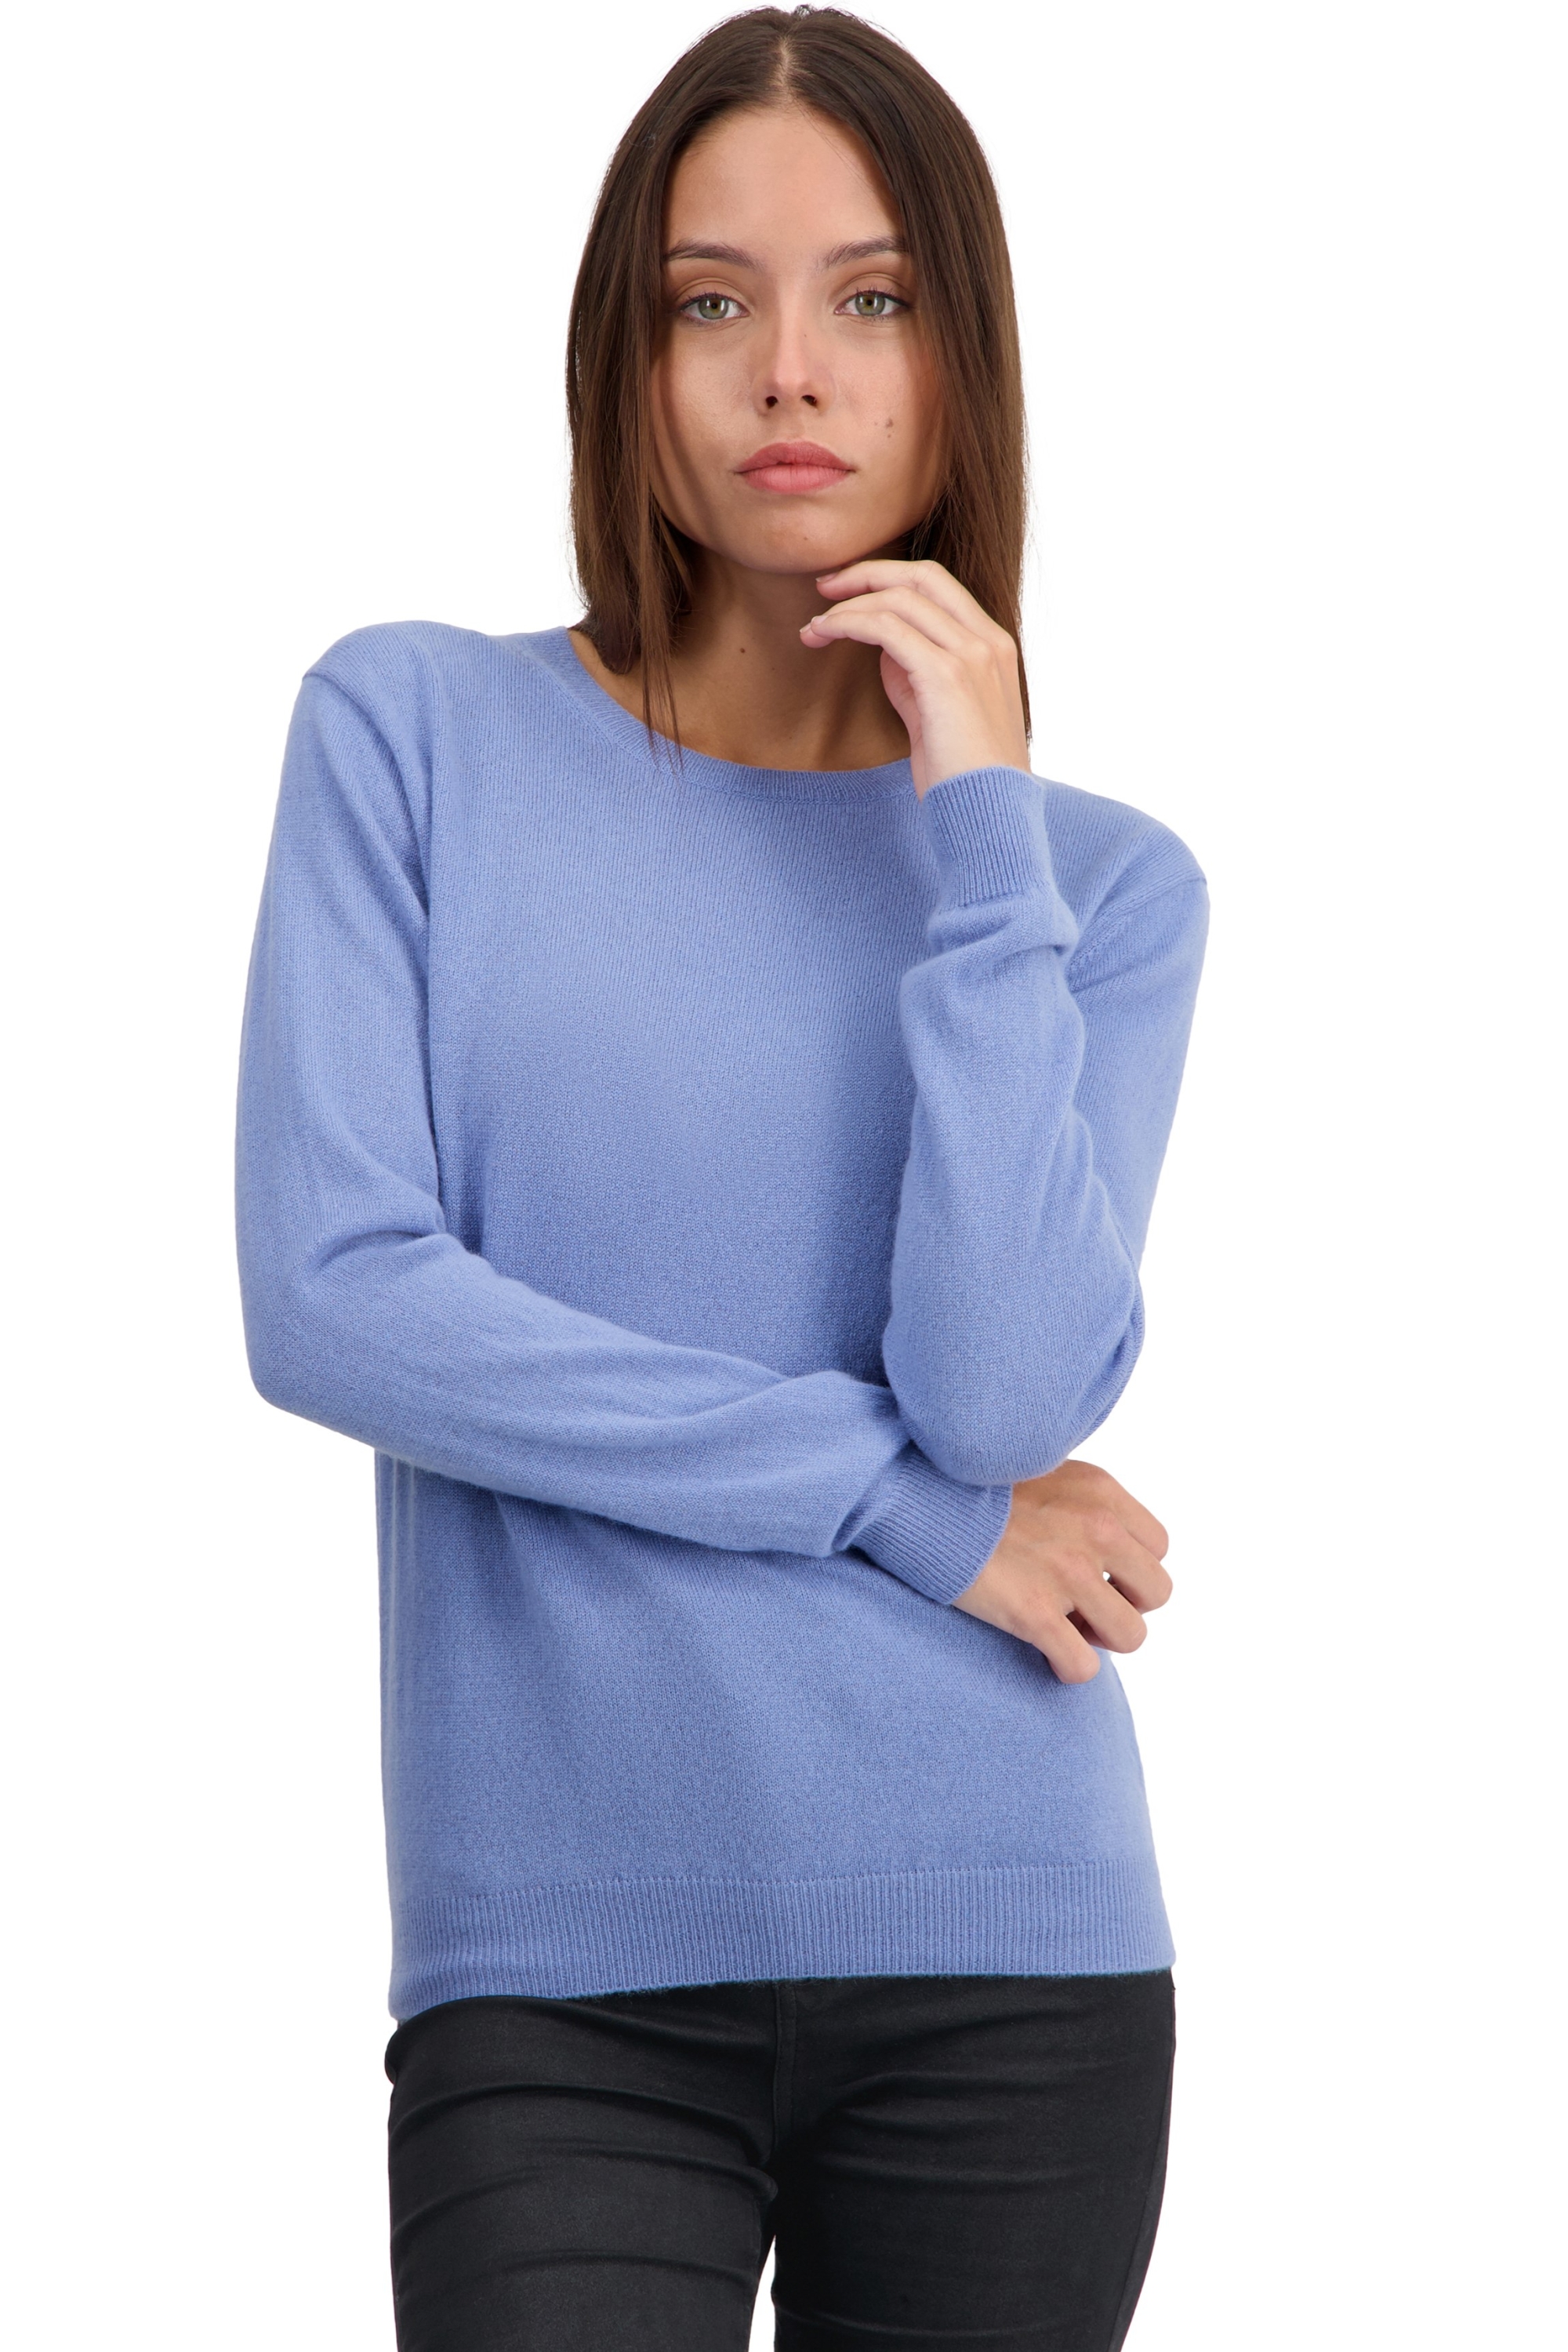 Cashmere ladies basic sweaters at low prices thalia first light blue s